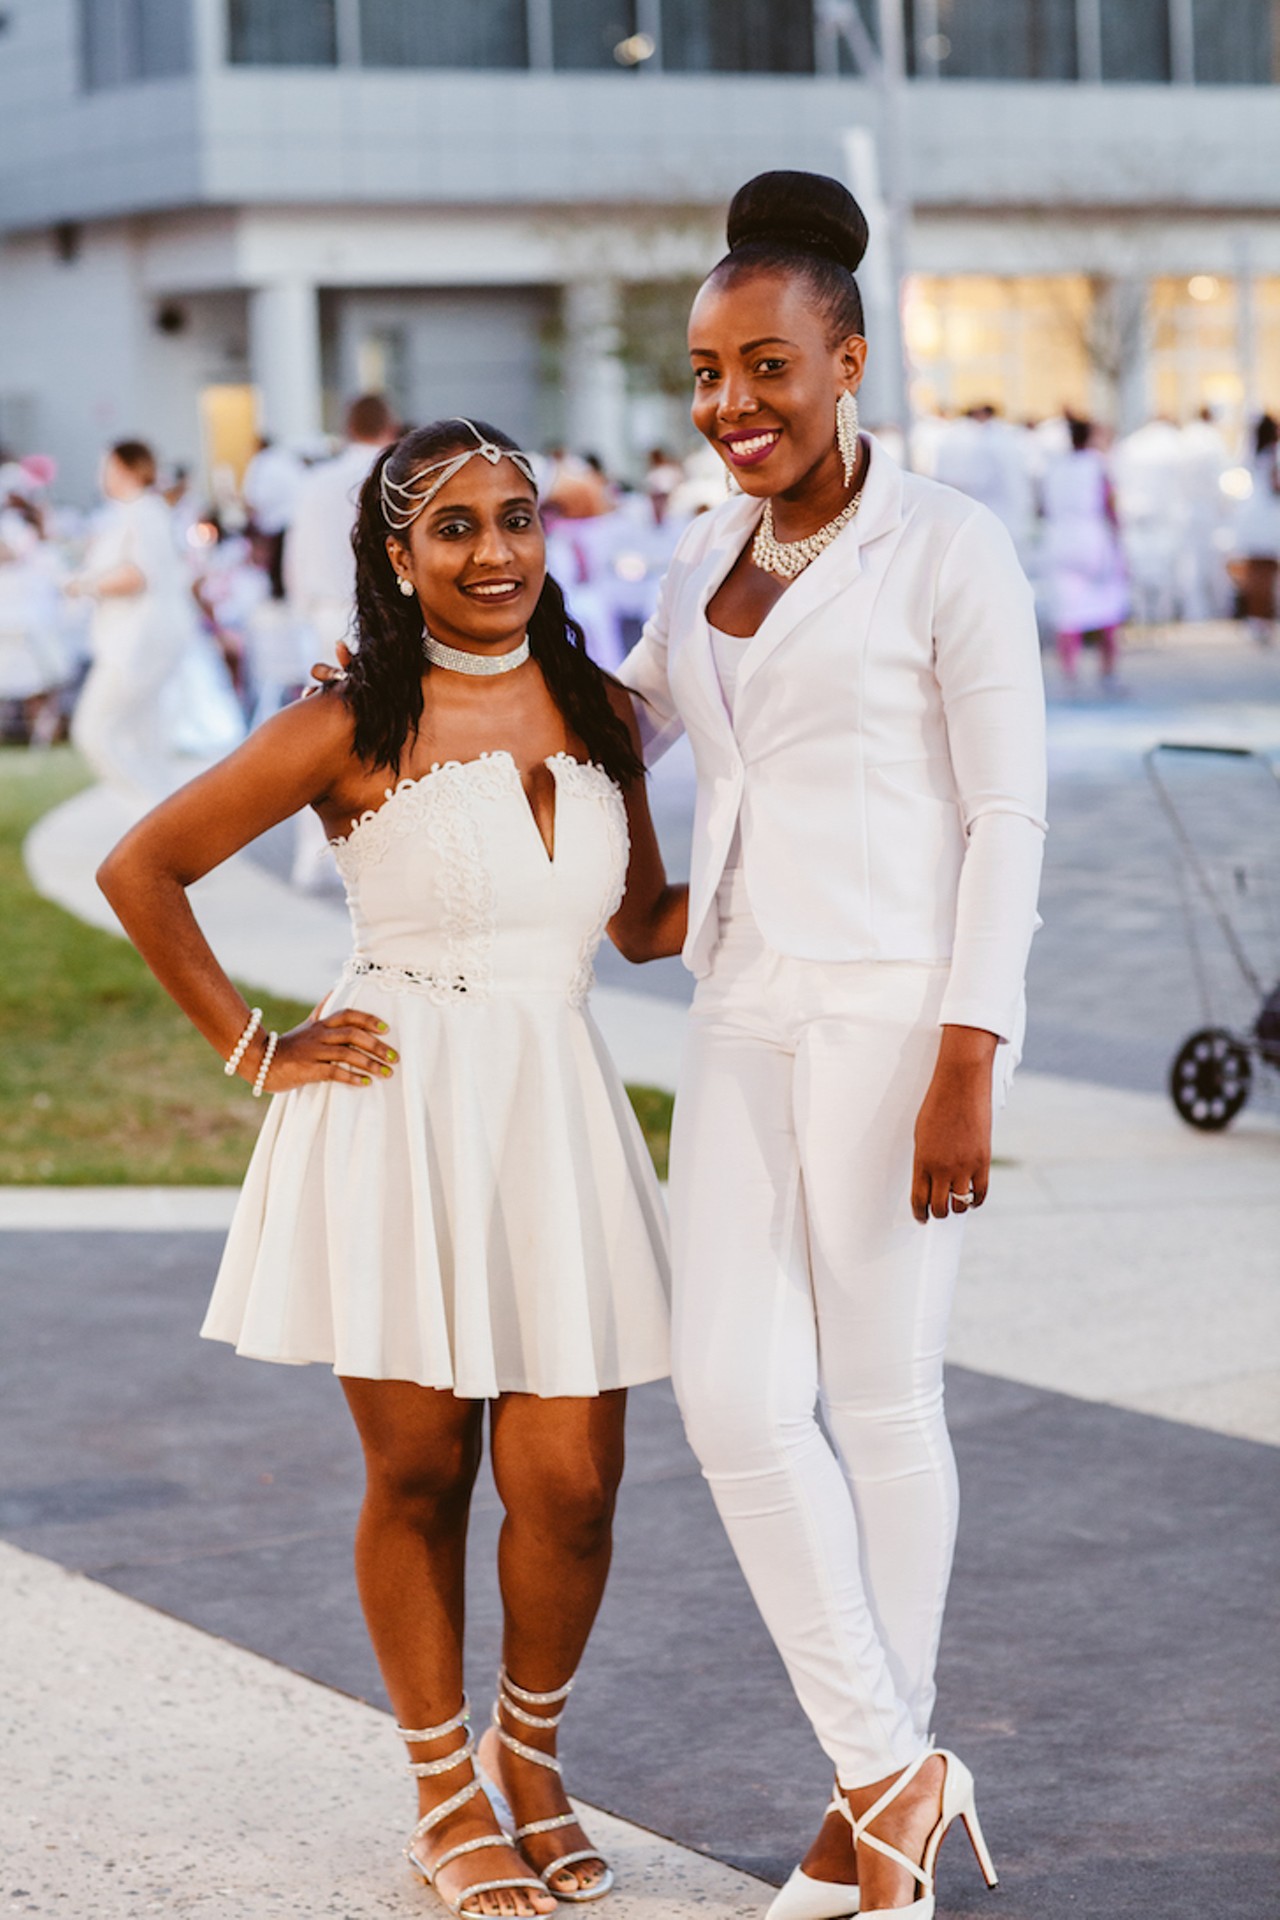 Steal a glimpse of Le Diner en Blanc, the fancy all-white dinner party